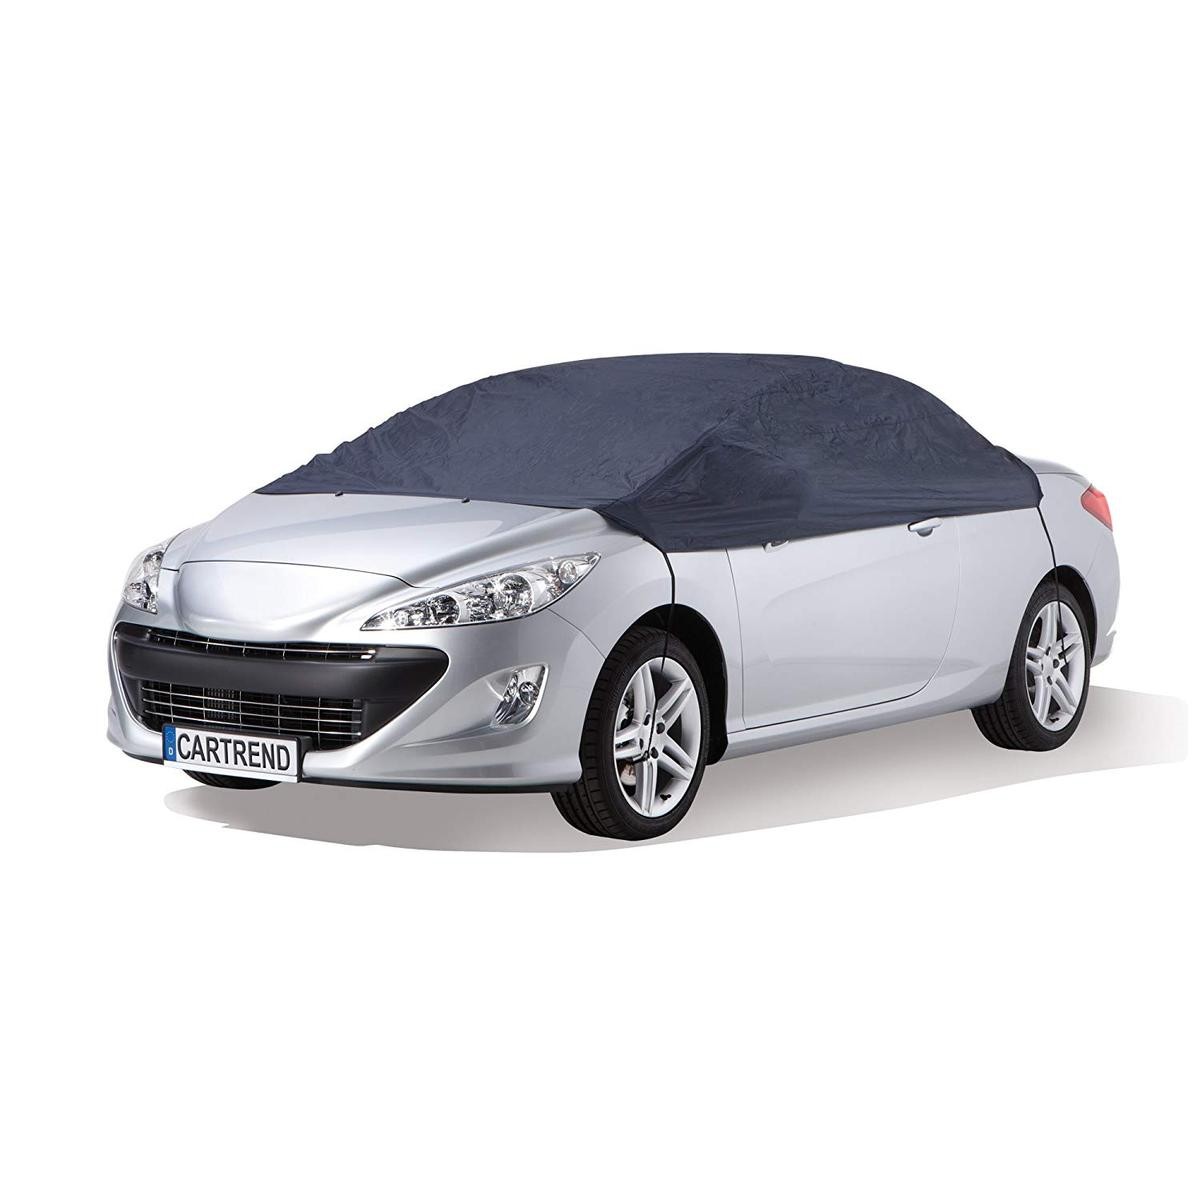 Protective car covers outdoor CARTREND 70340